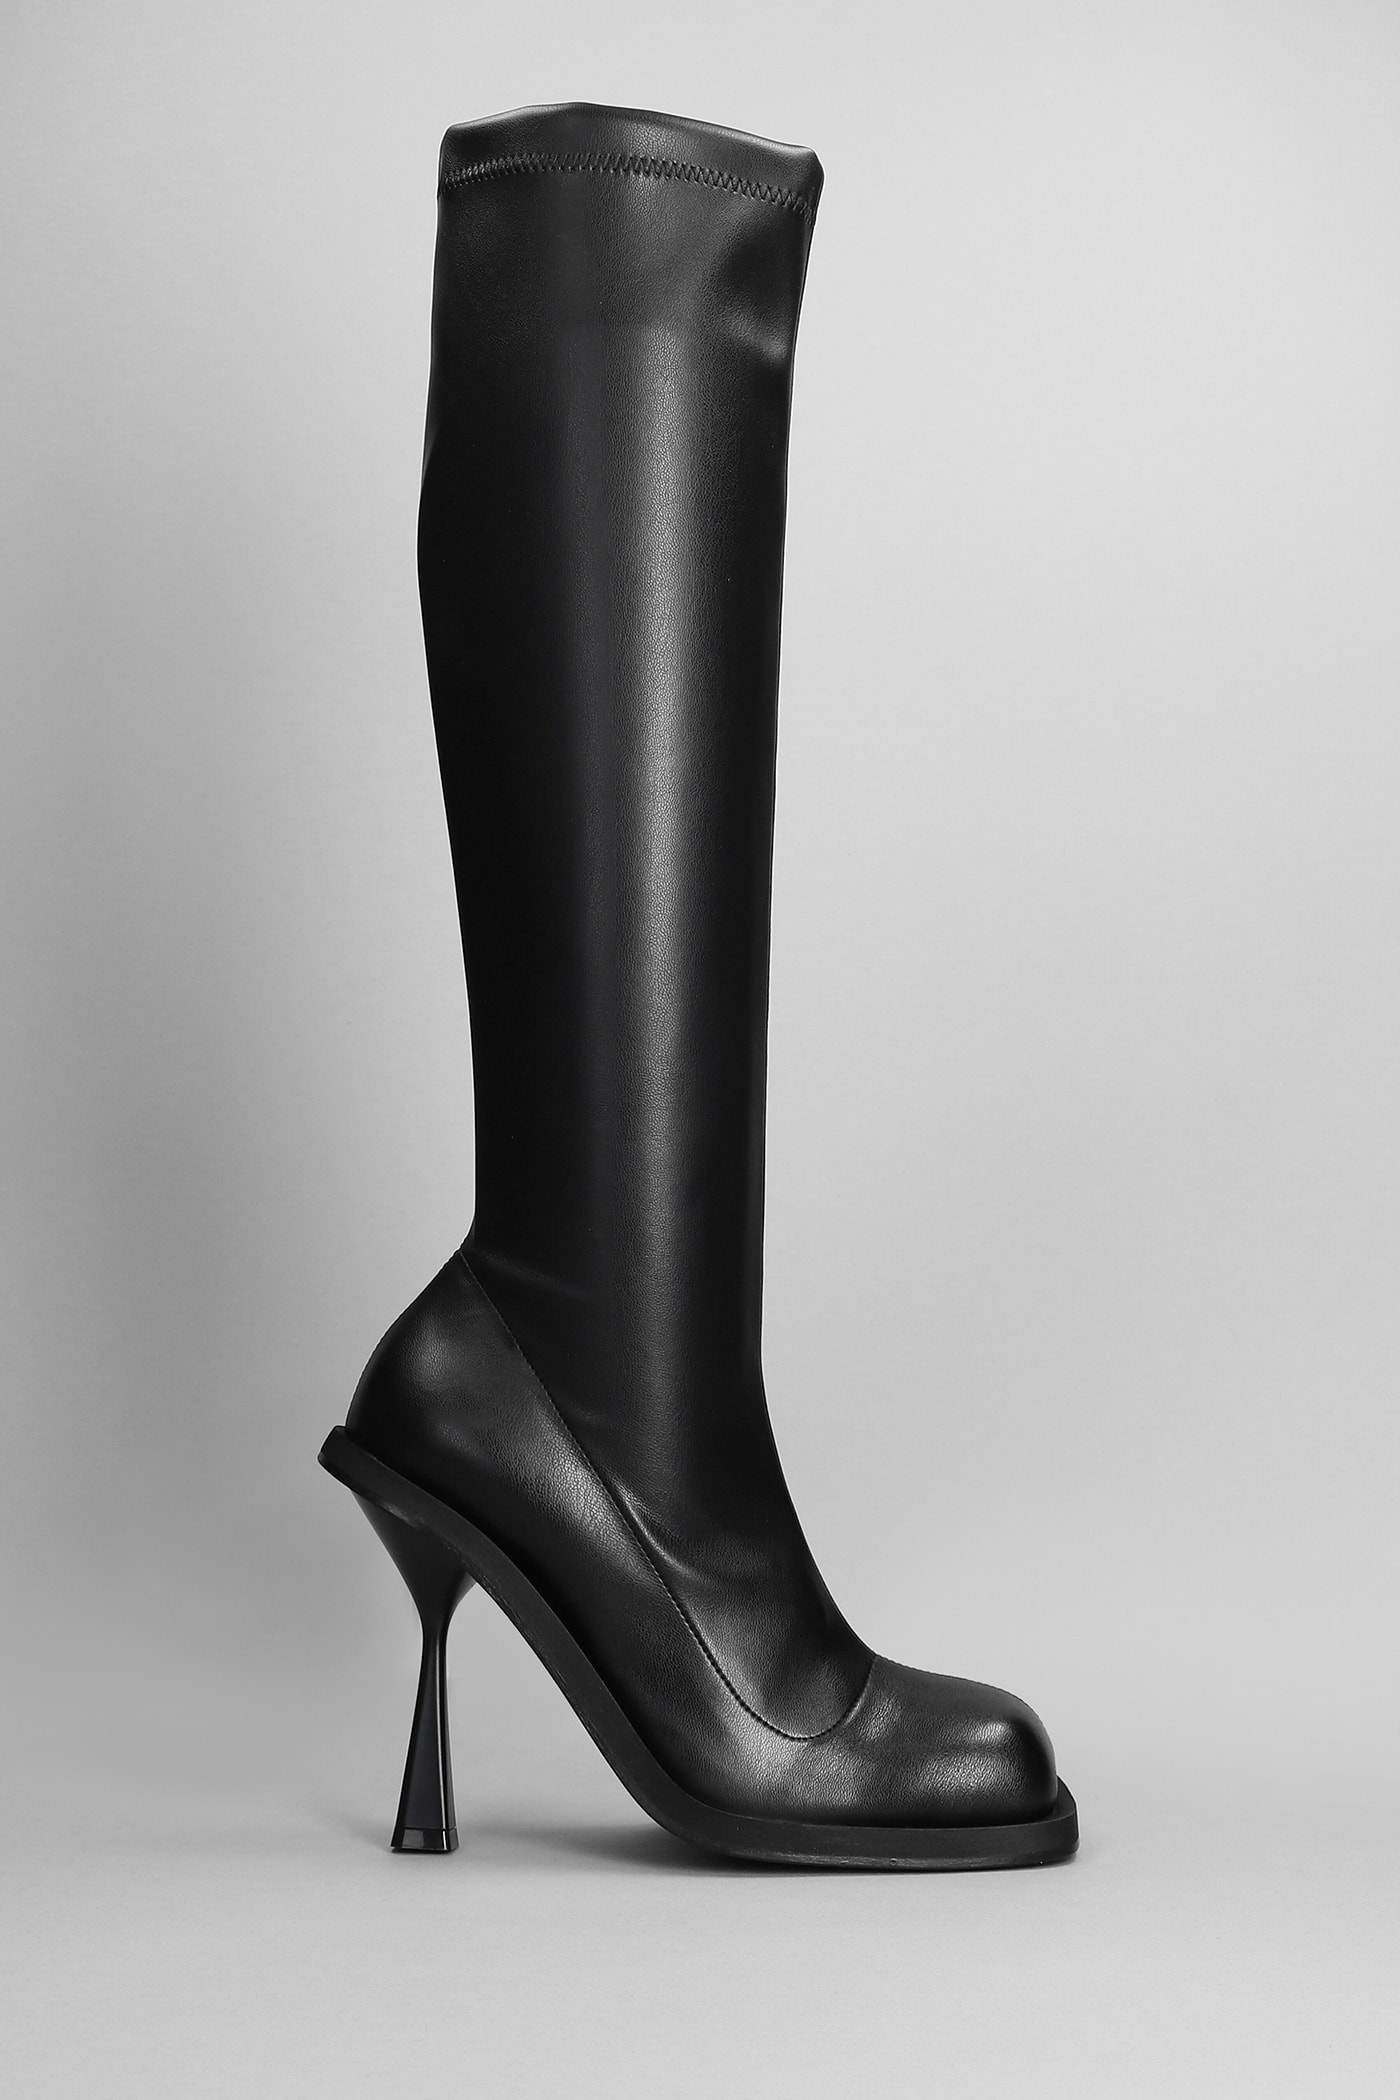 ANDREADAMO High Heels Boots In Black Leather